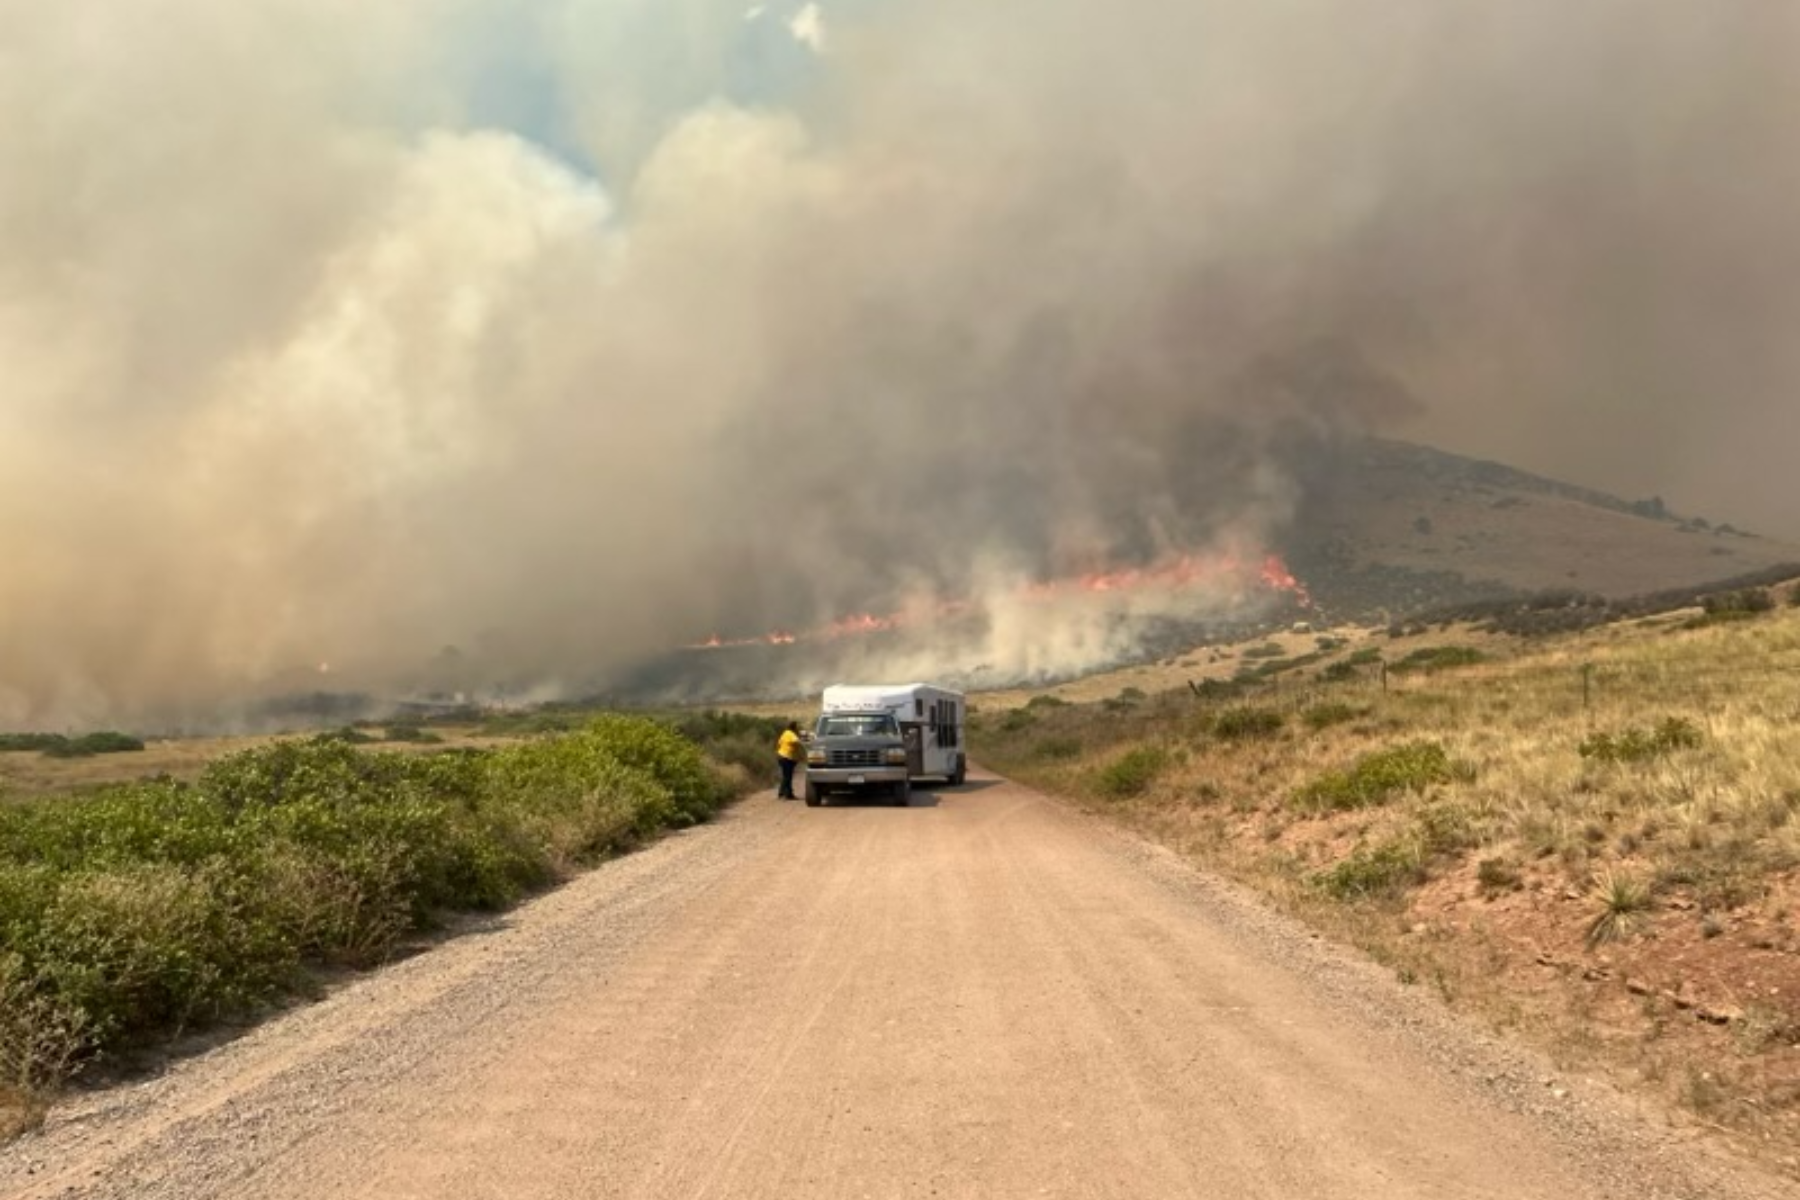 Smoke billows from the Stone Canyon fire along a dirt road with flames visible in the background.